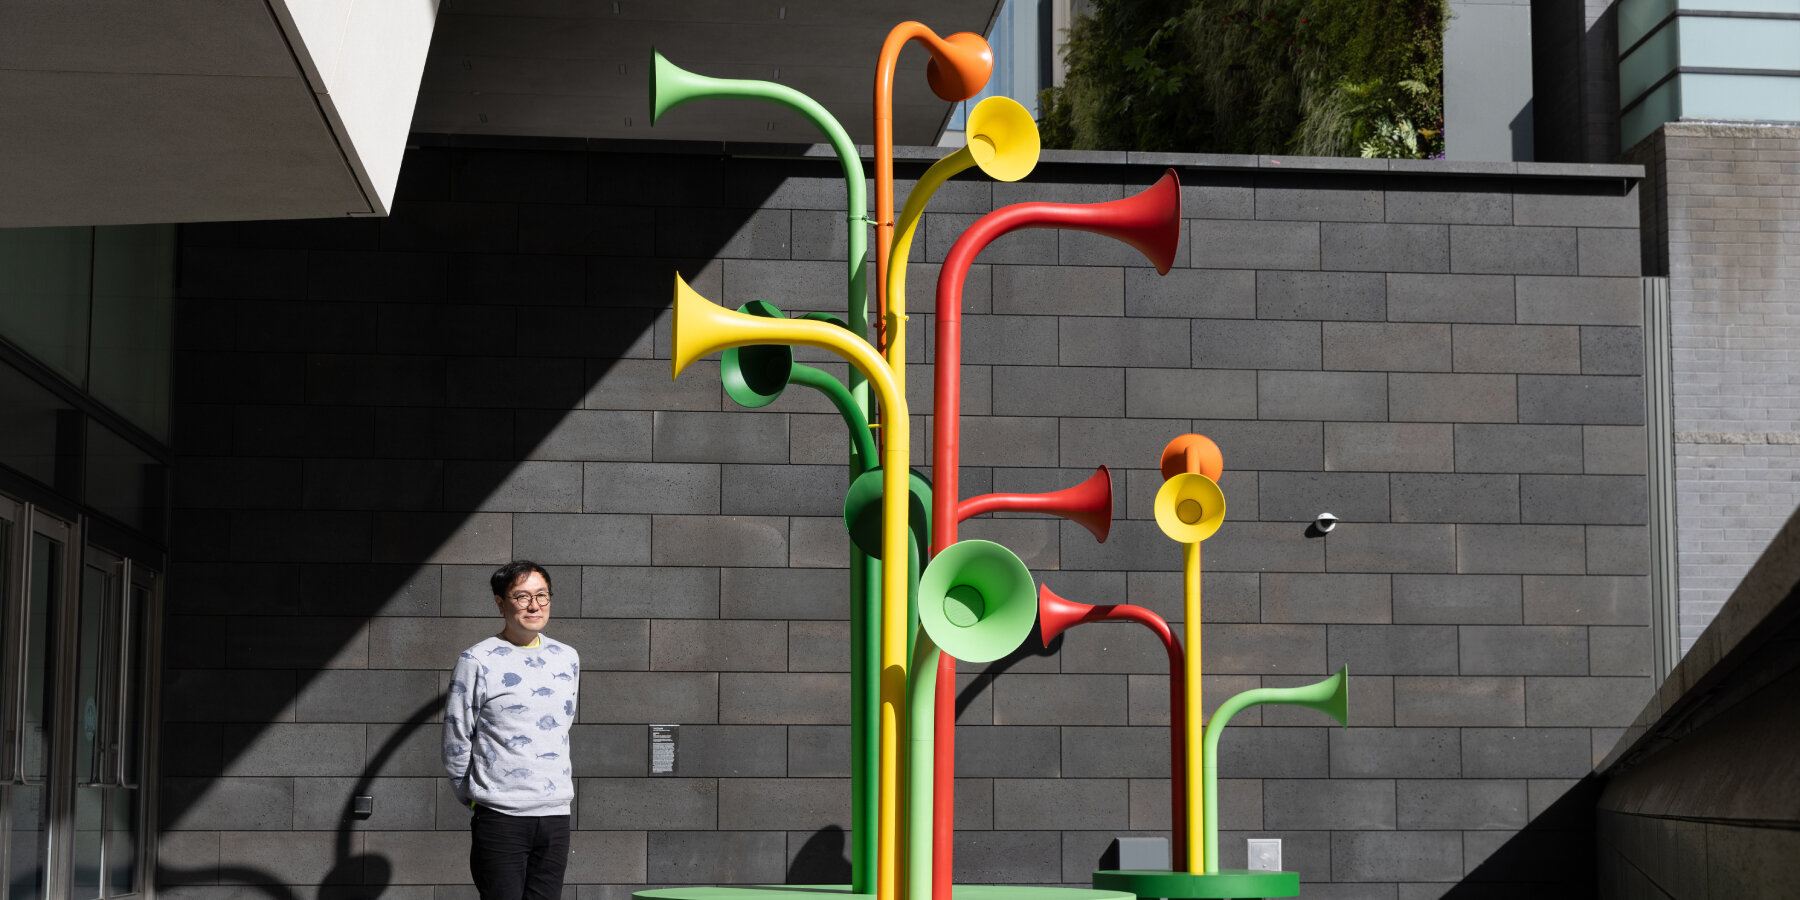 yuri suzuki's colorful horn-shaped speakers play ambient city 